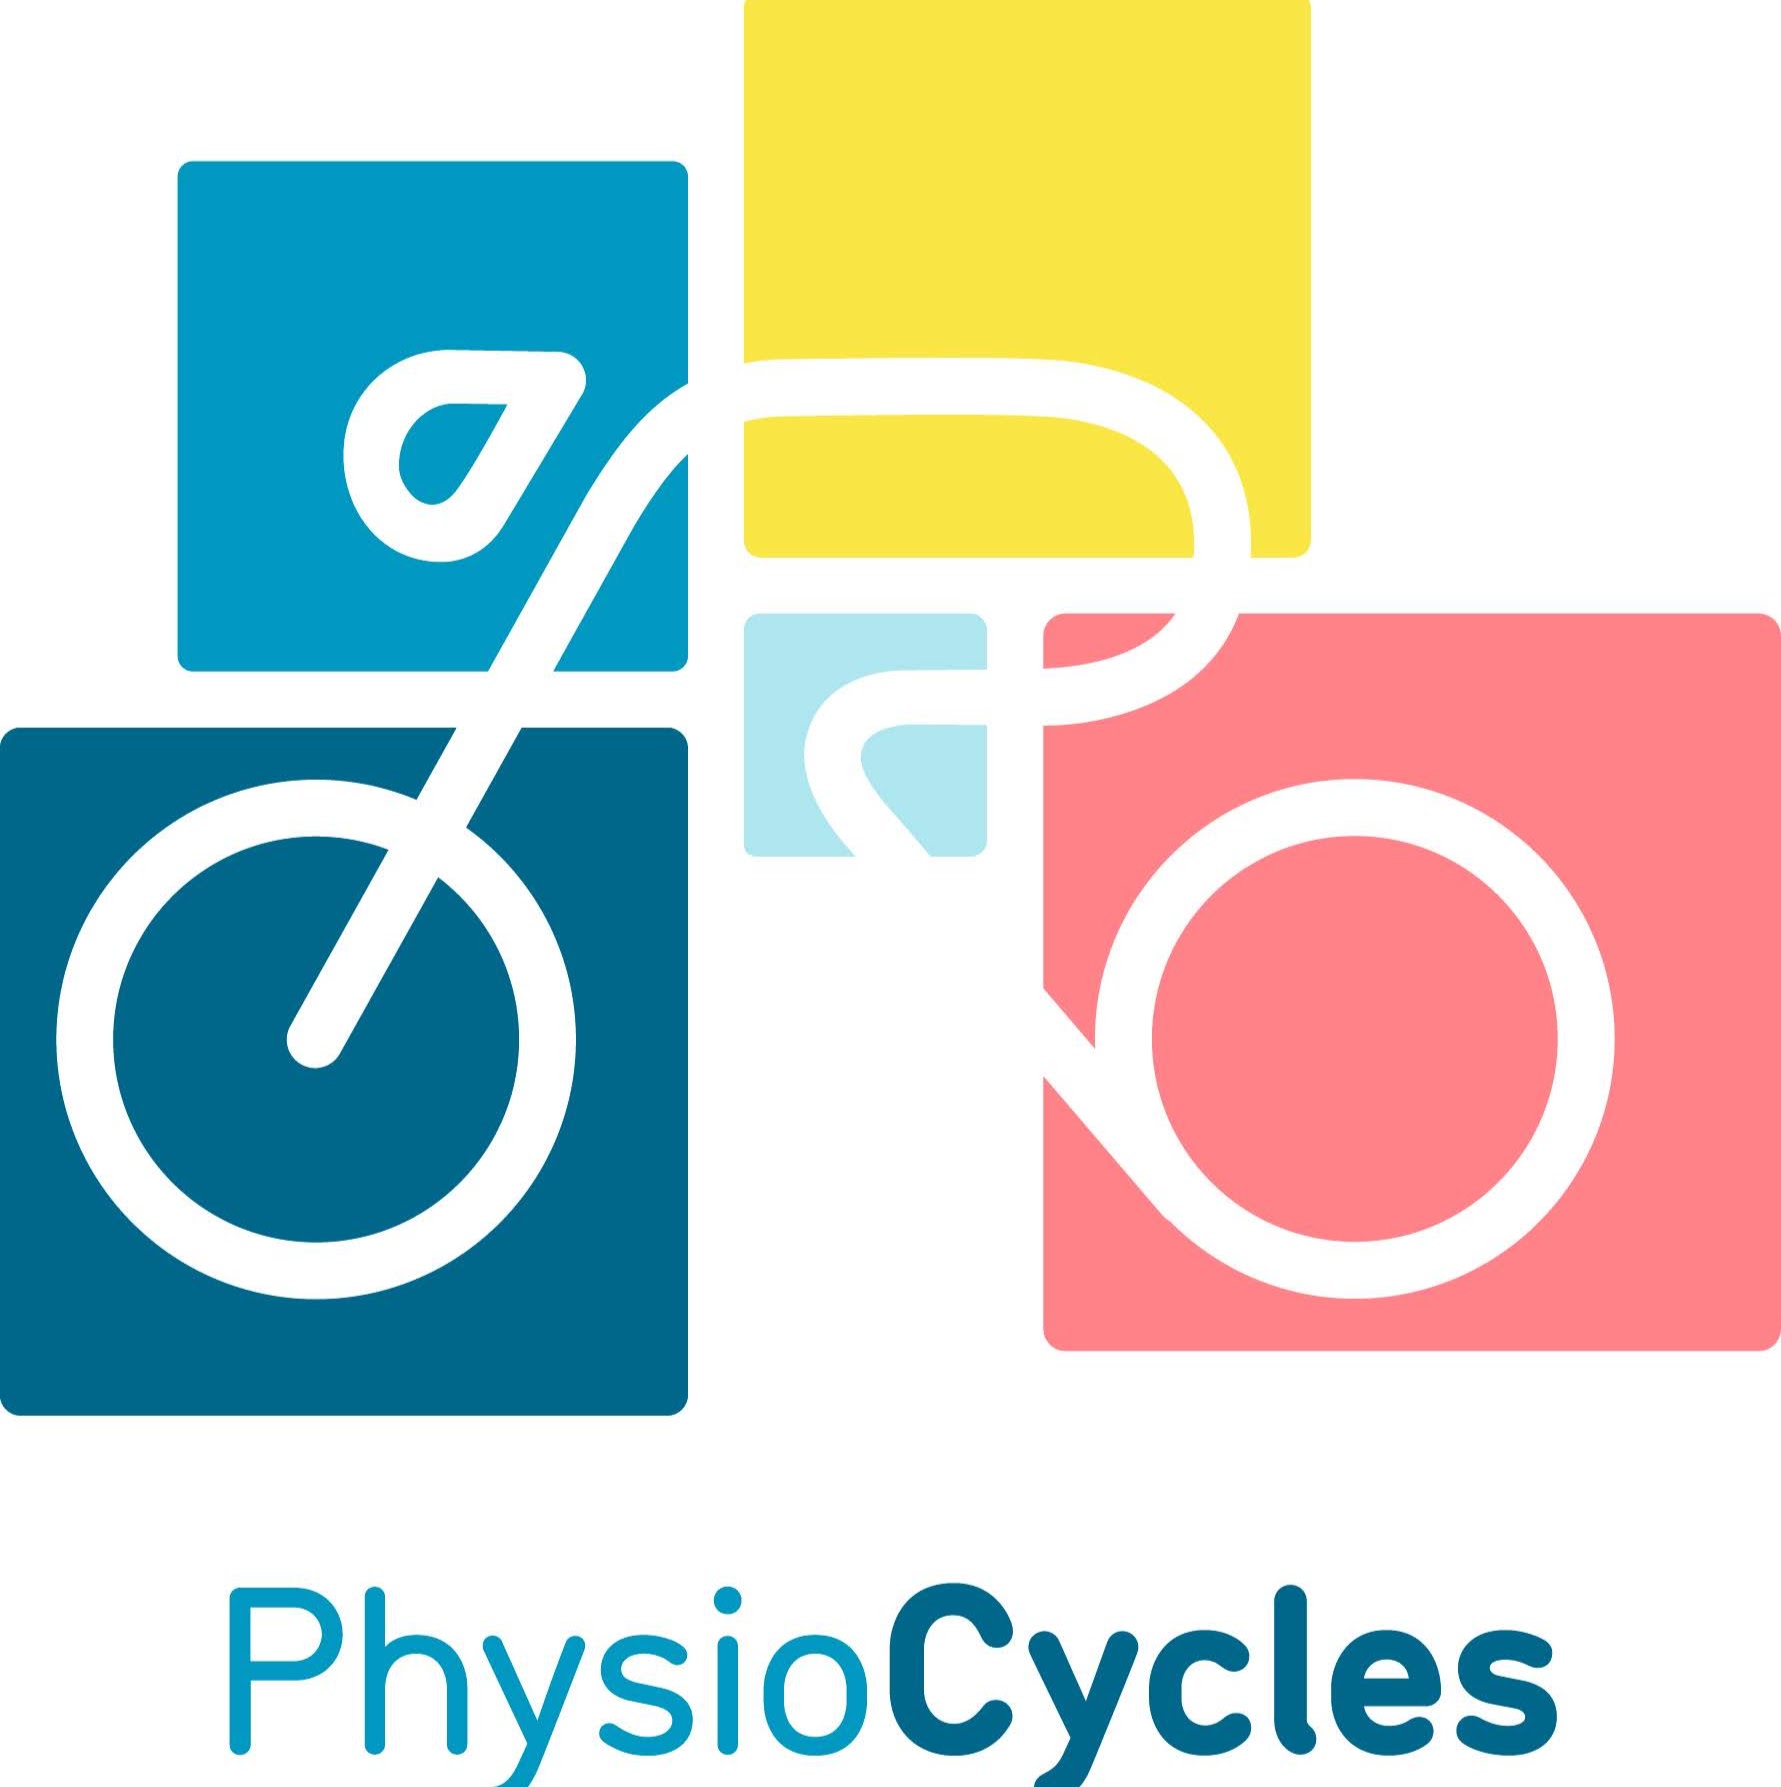 Physiocycles Gmbh & Co.kg